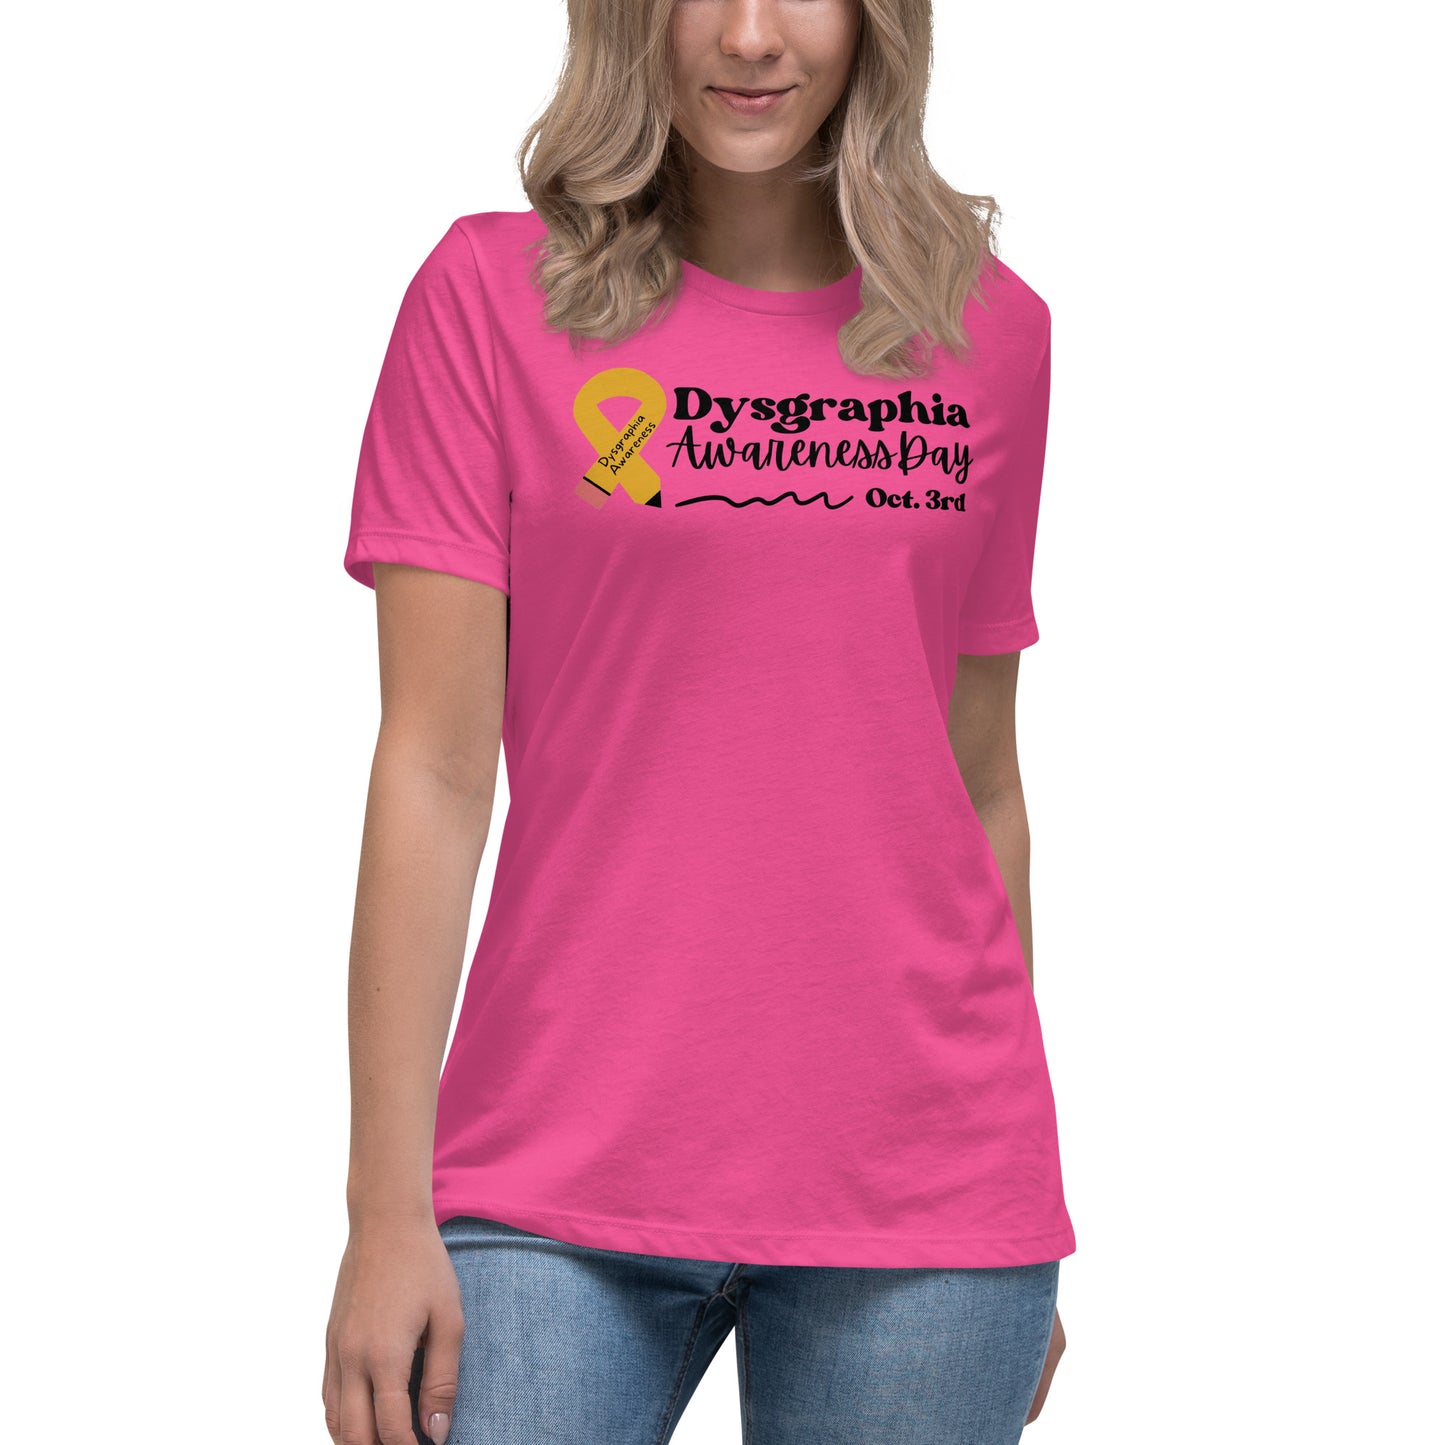 Official Dysgraphia Awareness Day T-shirt for Women